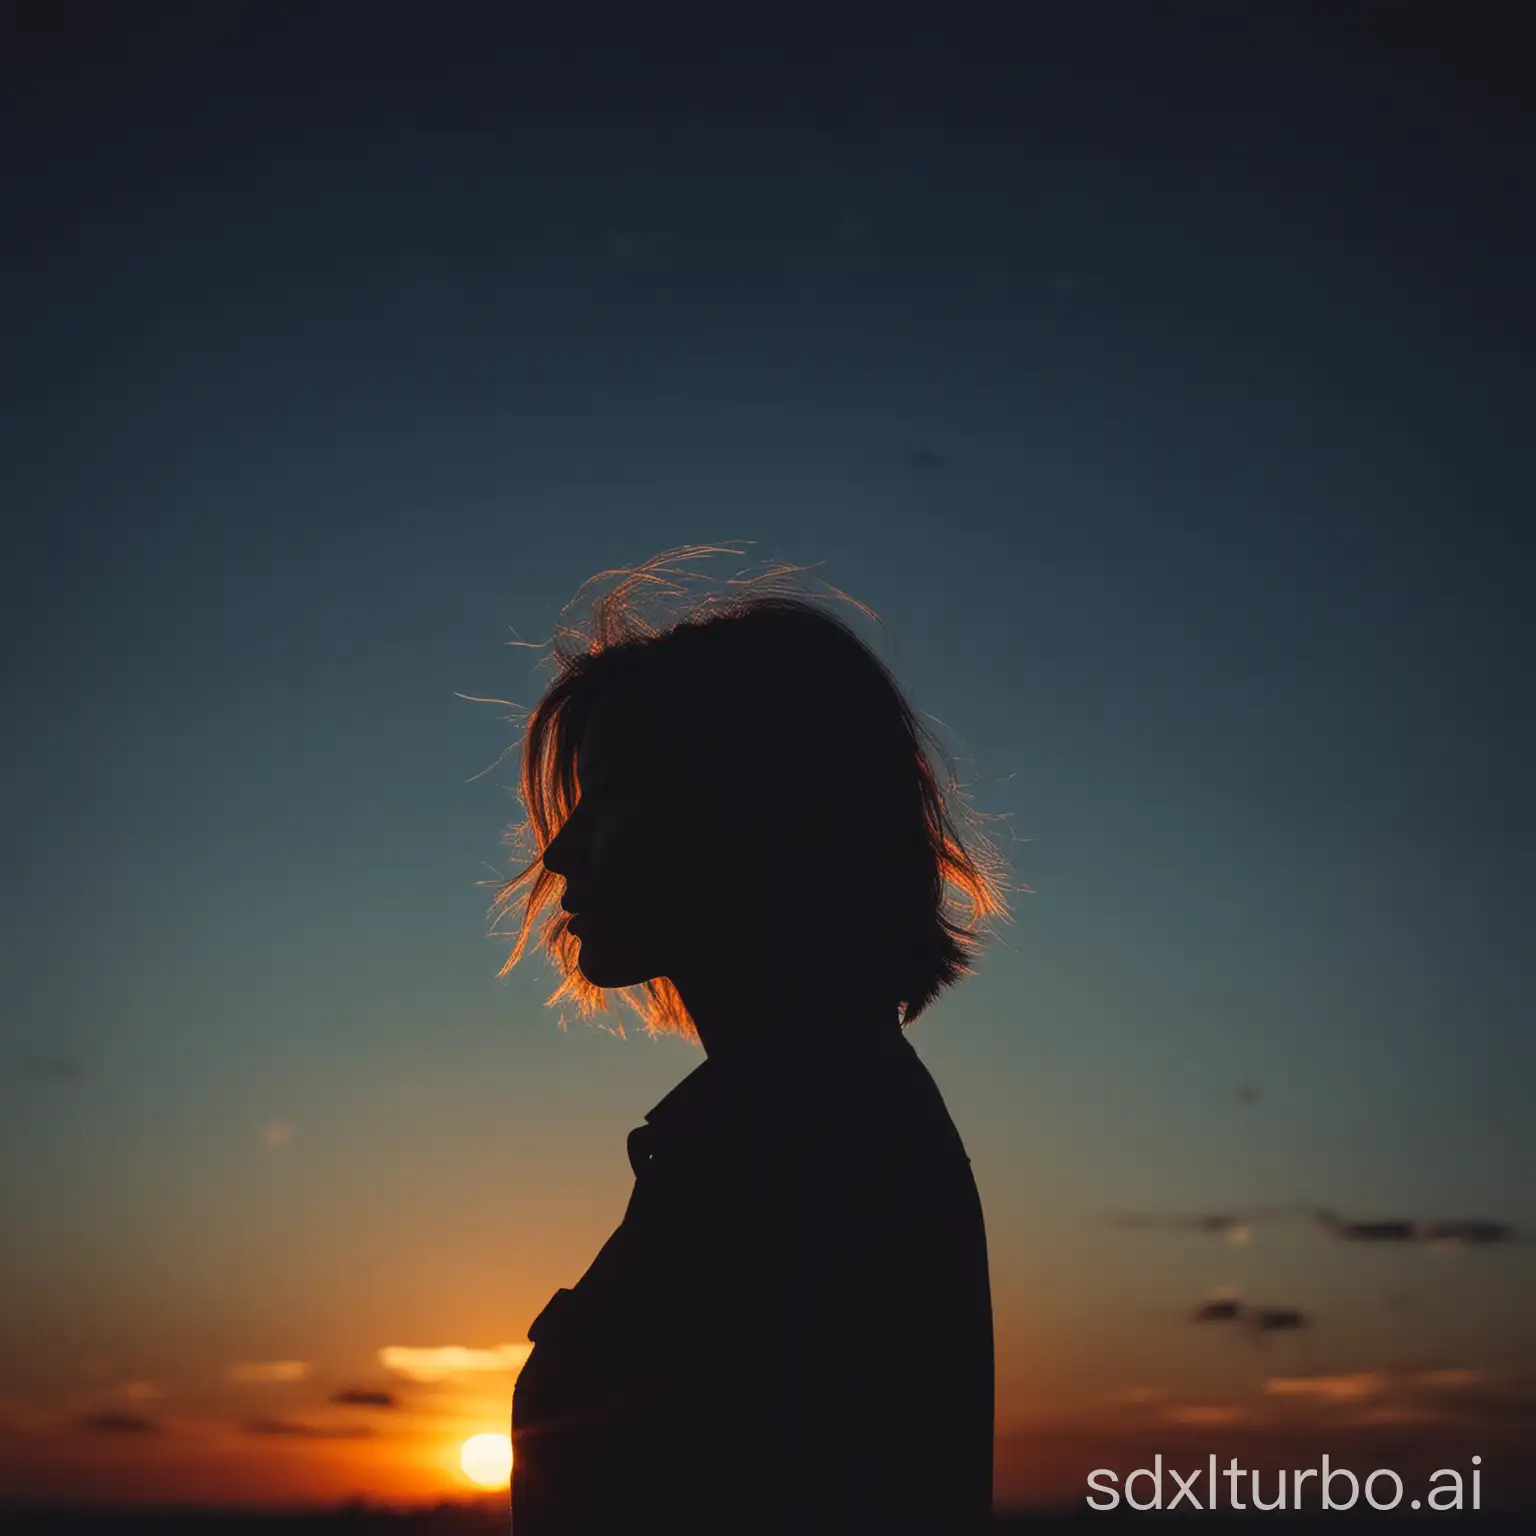 Silhouette-of-Women-Against-Cinematic-Sunset-Sky